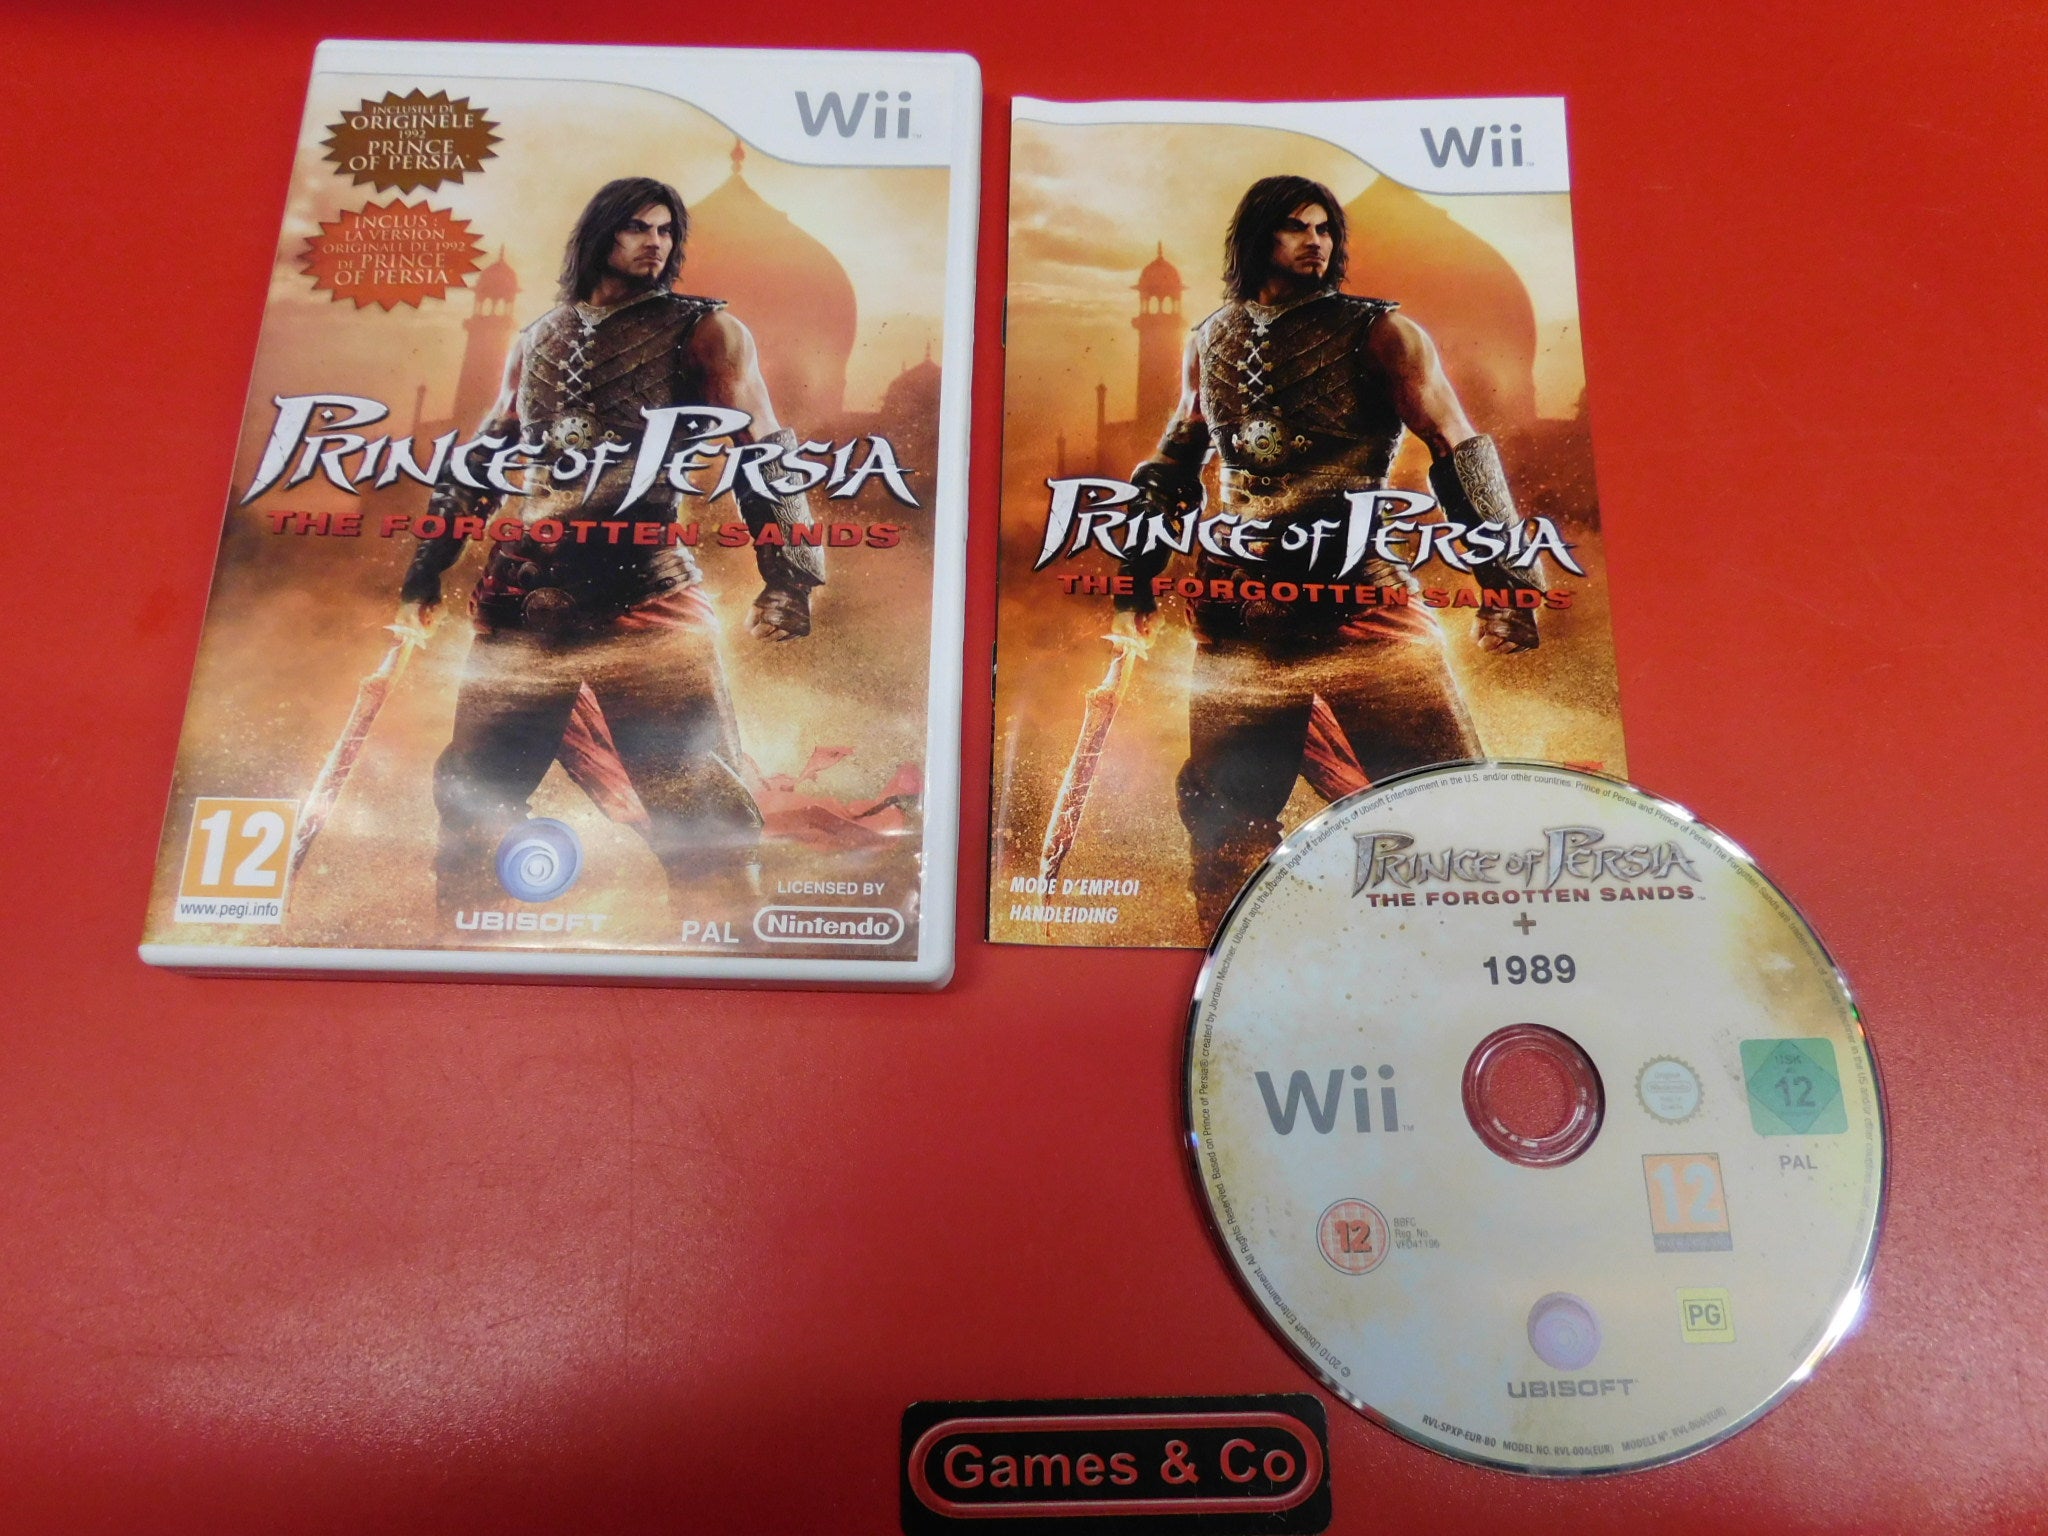 PRINCE OF PERSIA THE FORGOTTEN SANDS